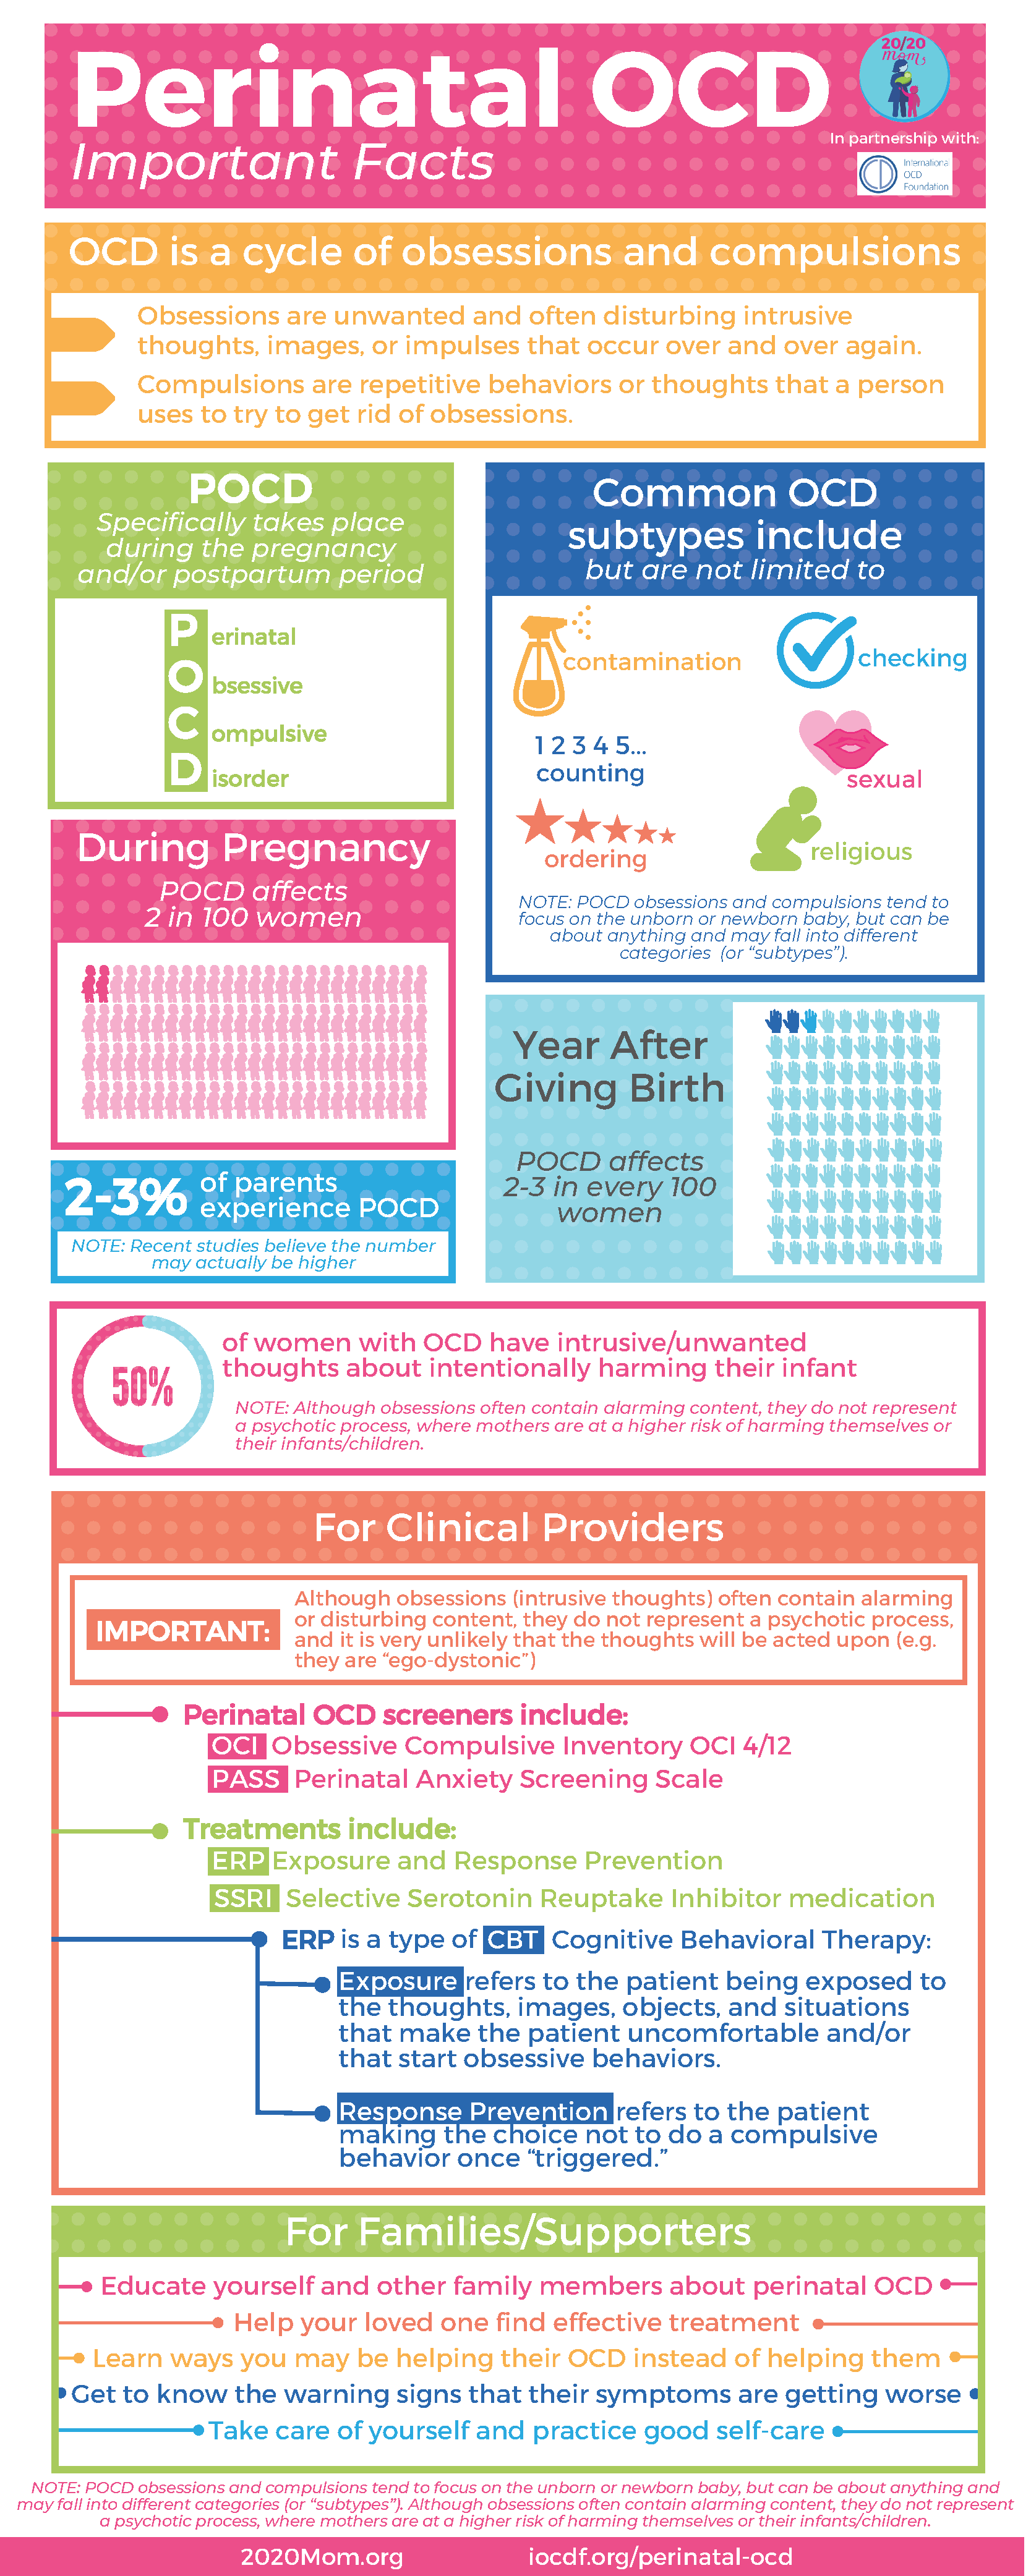 Perinatal OCD Important Facts Infographic